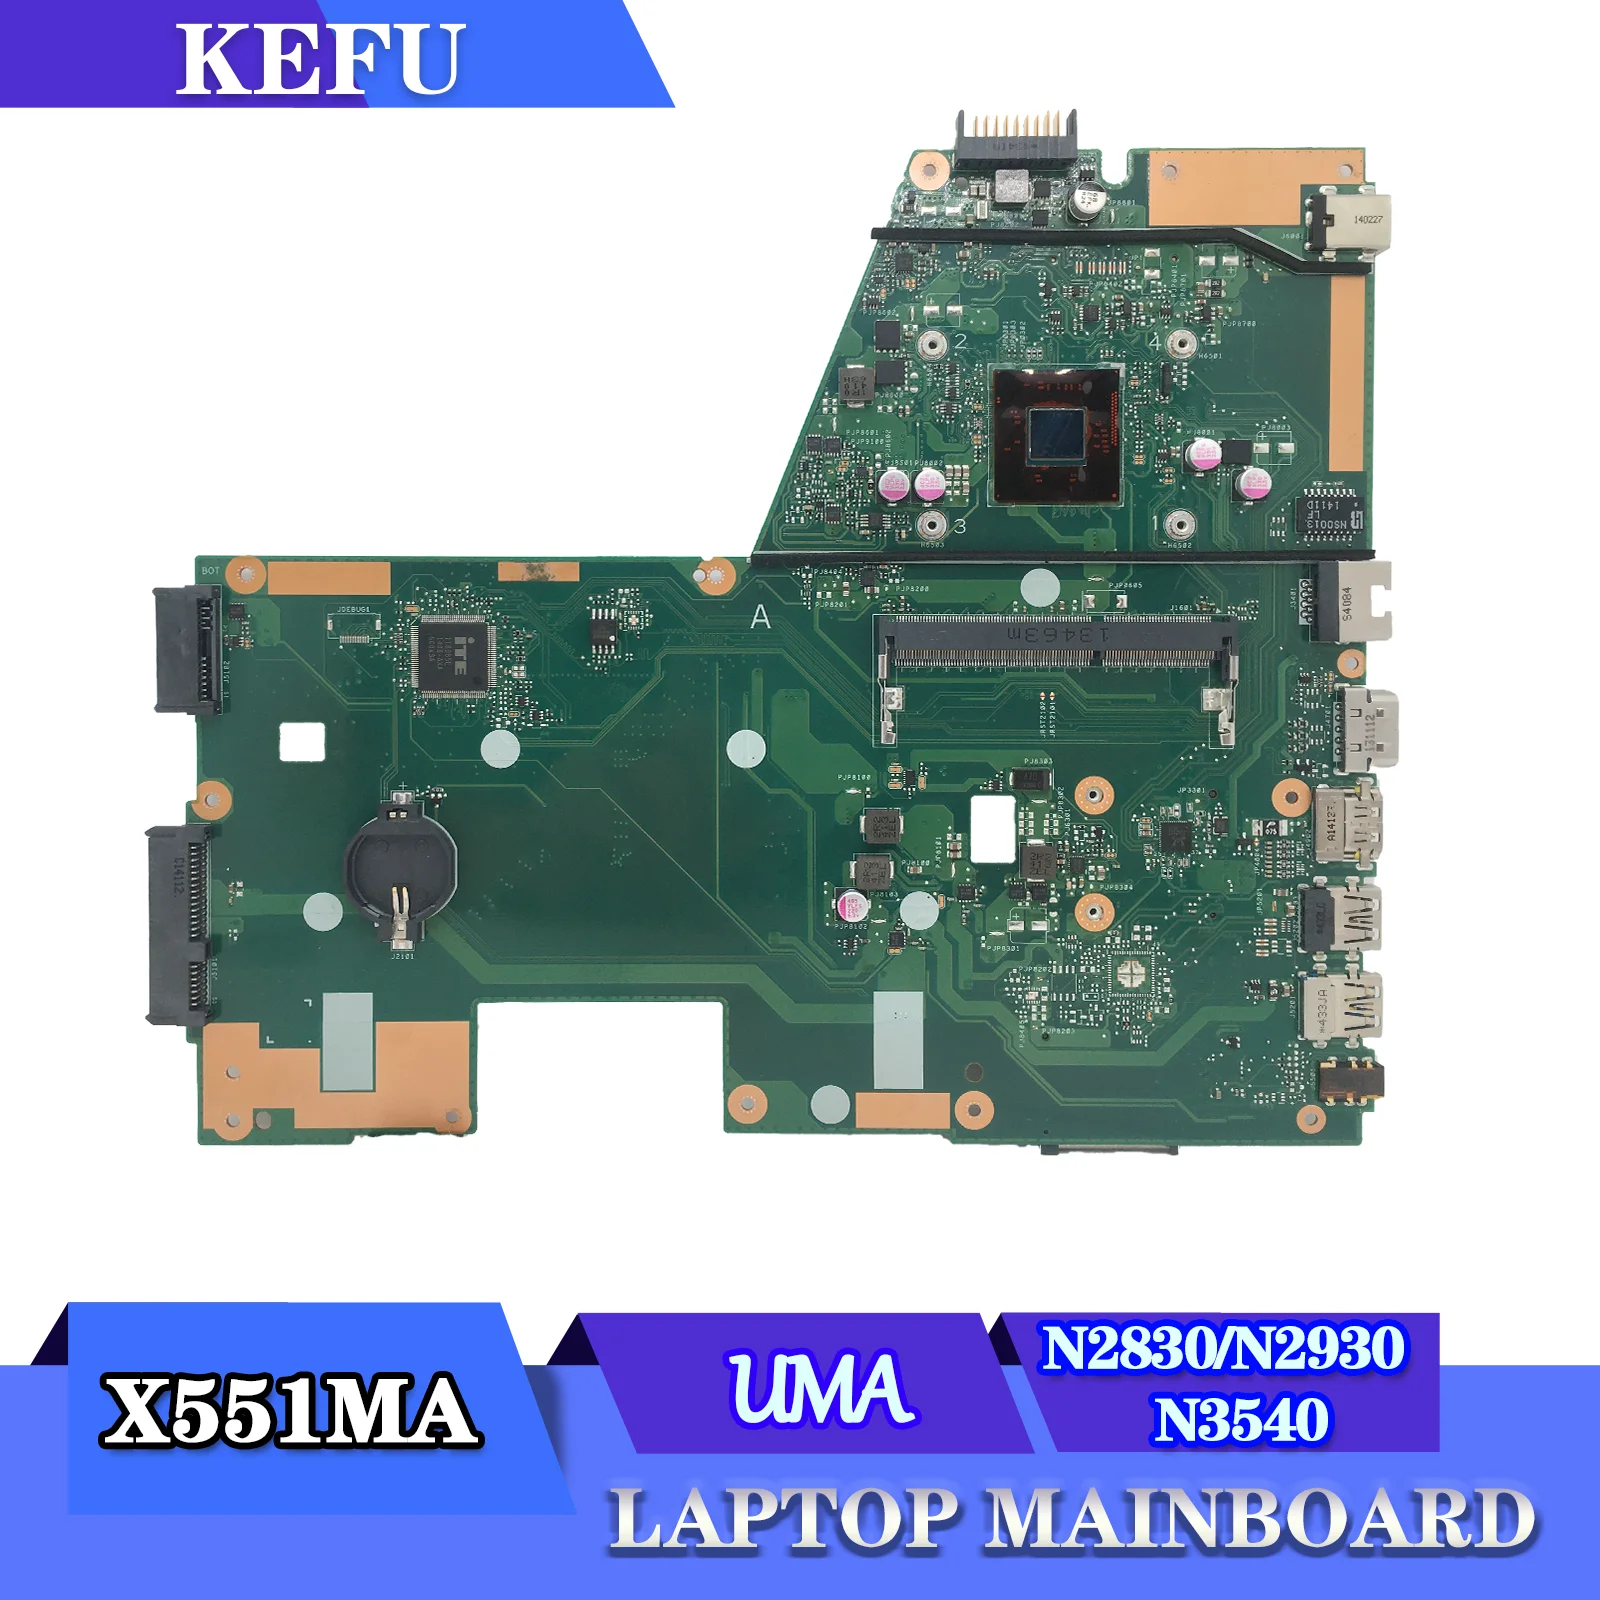 

KEFU Notebook X551MA Mainboard For ASUS X551M F551MA D550M Laptop Motherboard With CPU: N2830/N2930/N3540 100% Test OK